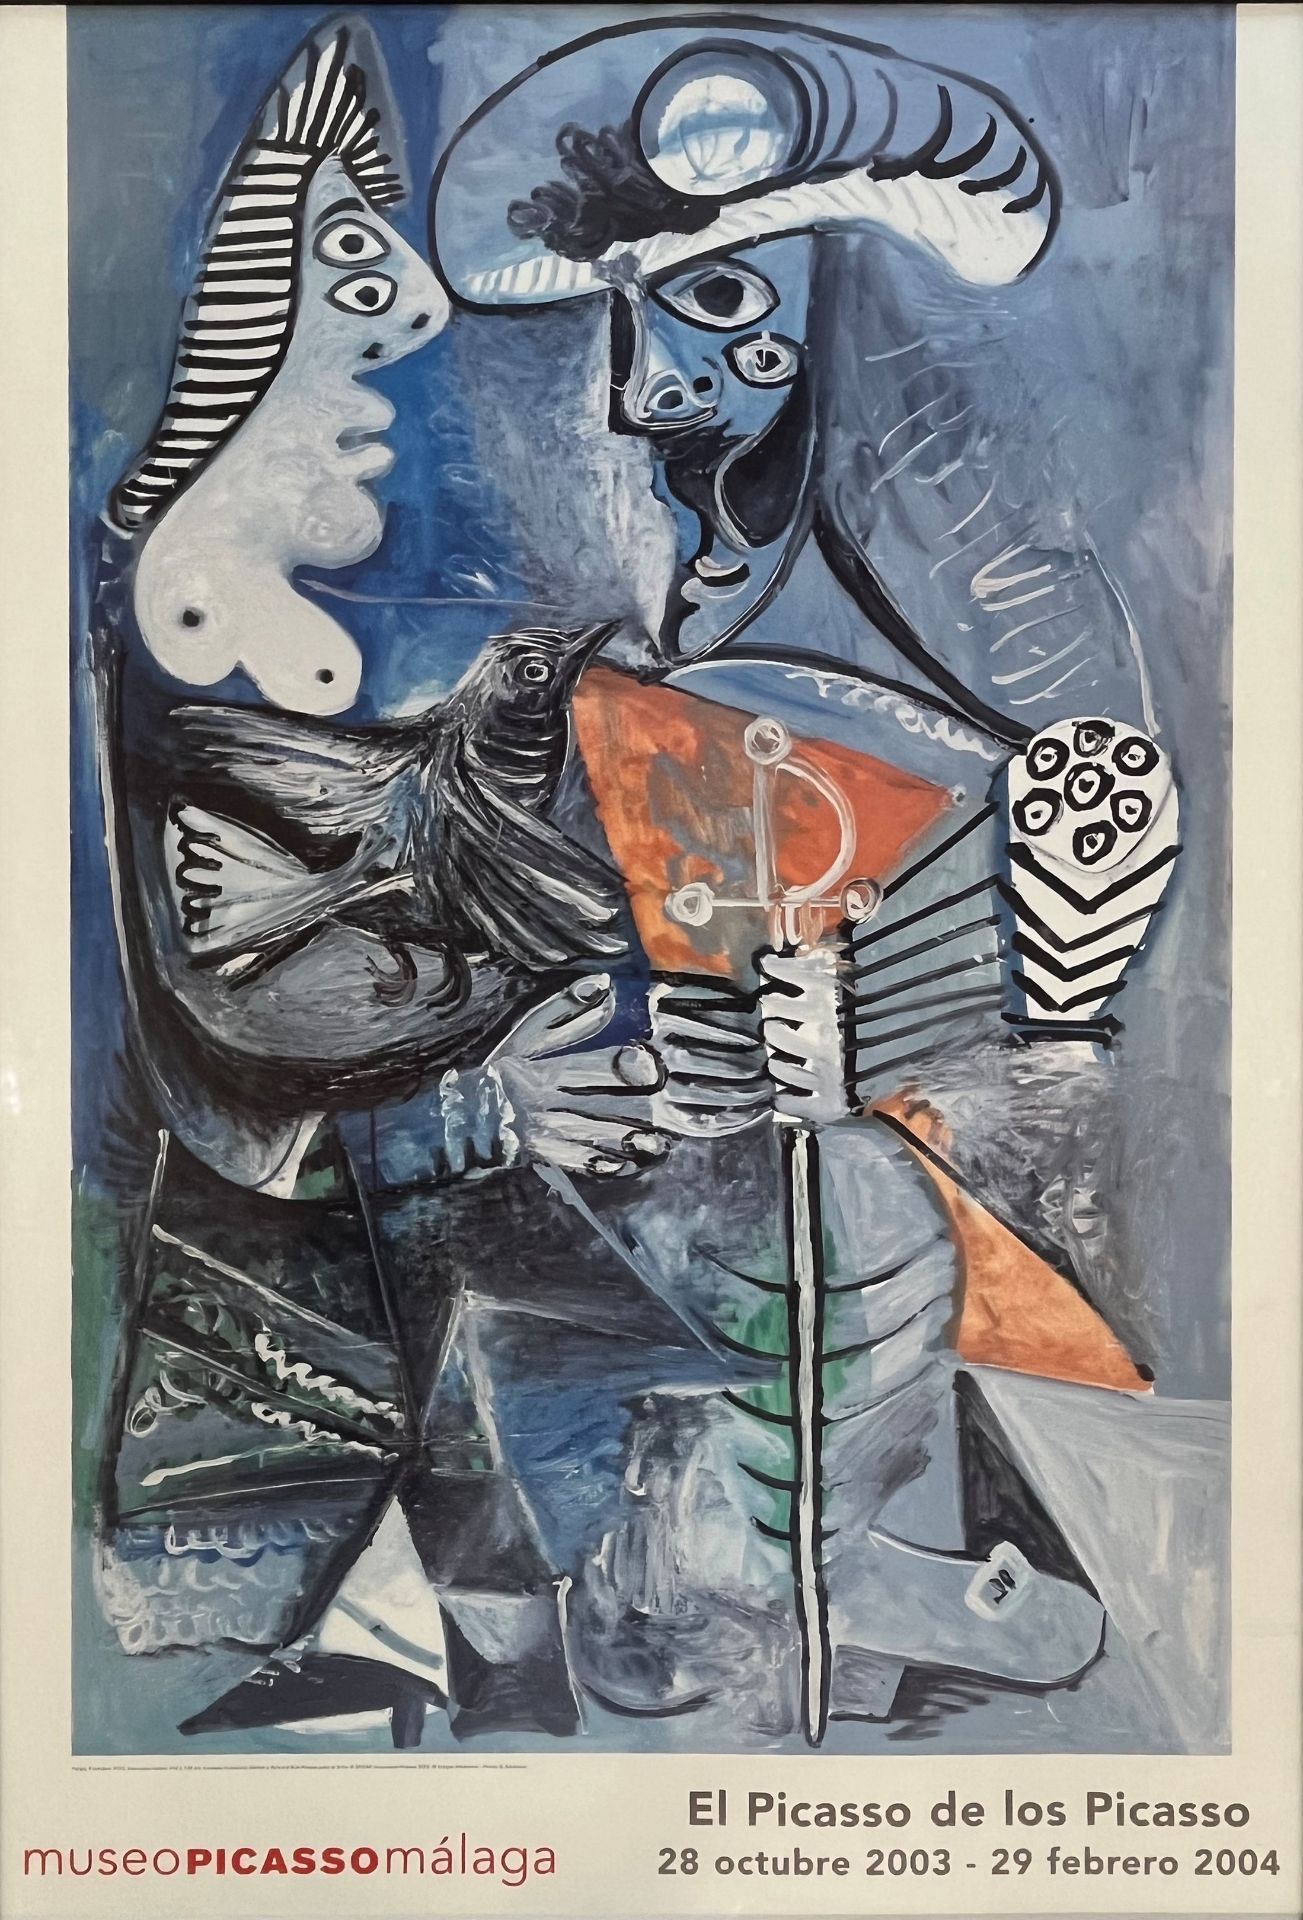 PABLO PICASSO - 2004 EXHIBITION POSTER FOR PICASSO MUSEUM - Image 2 of 6